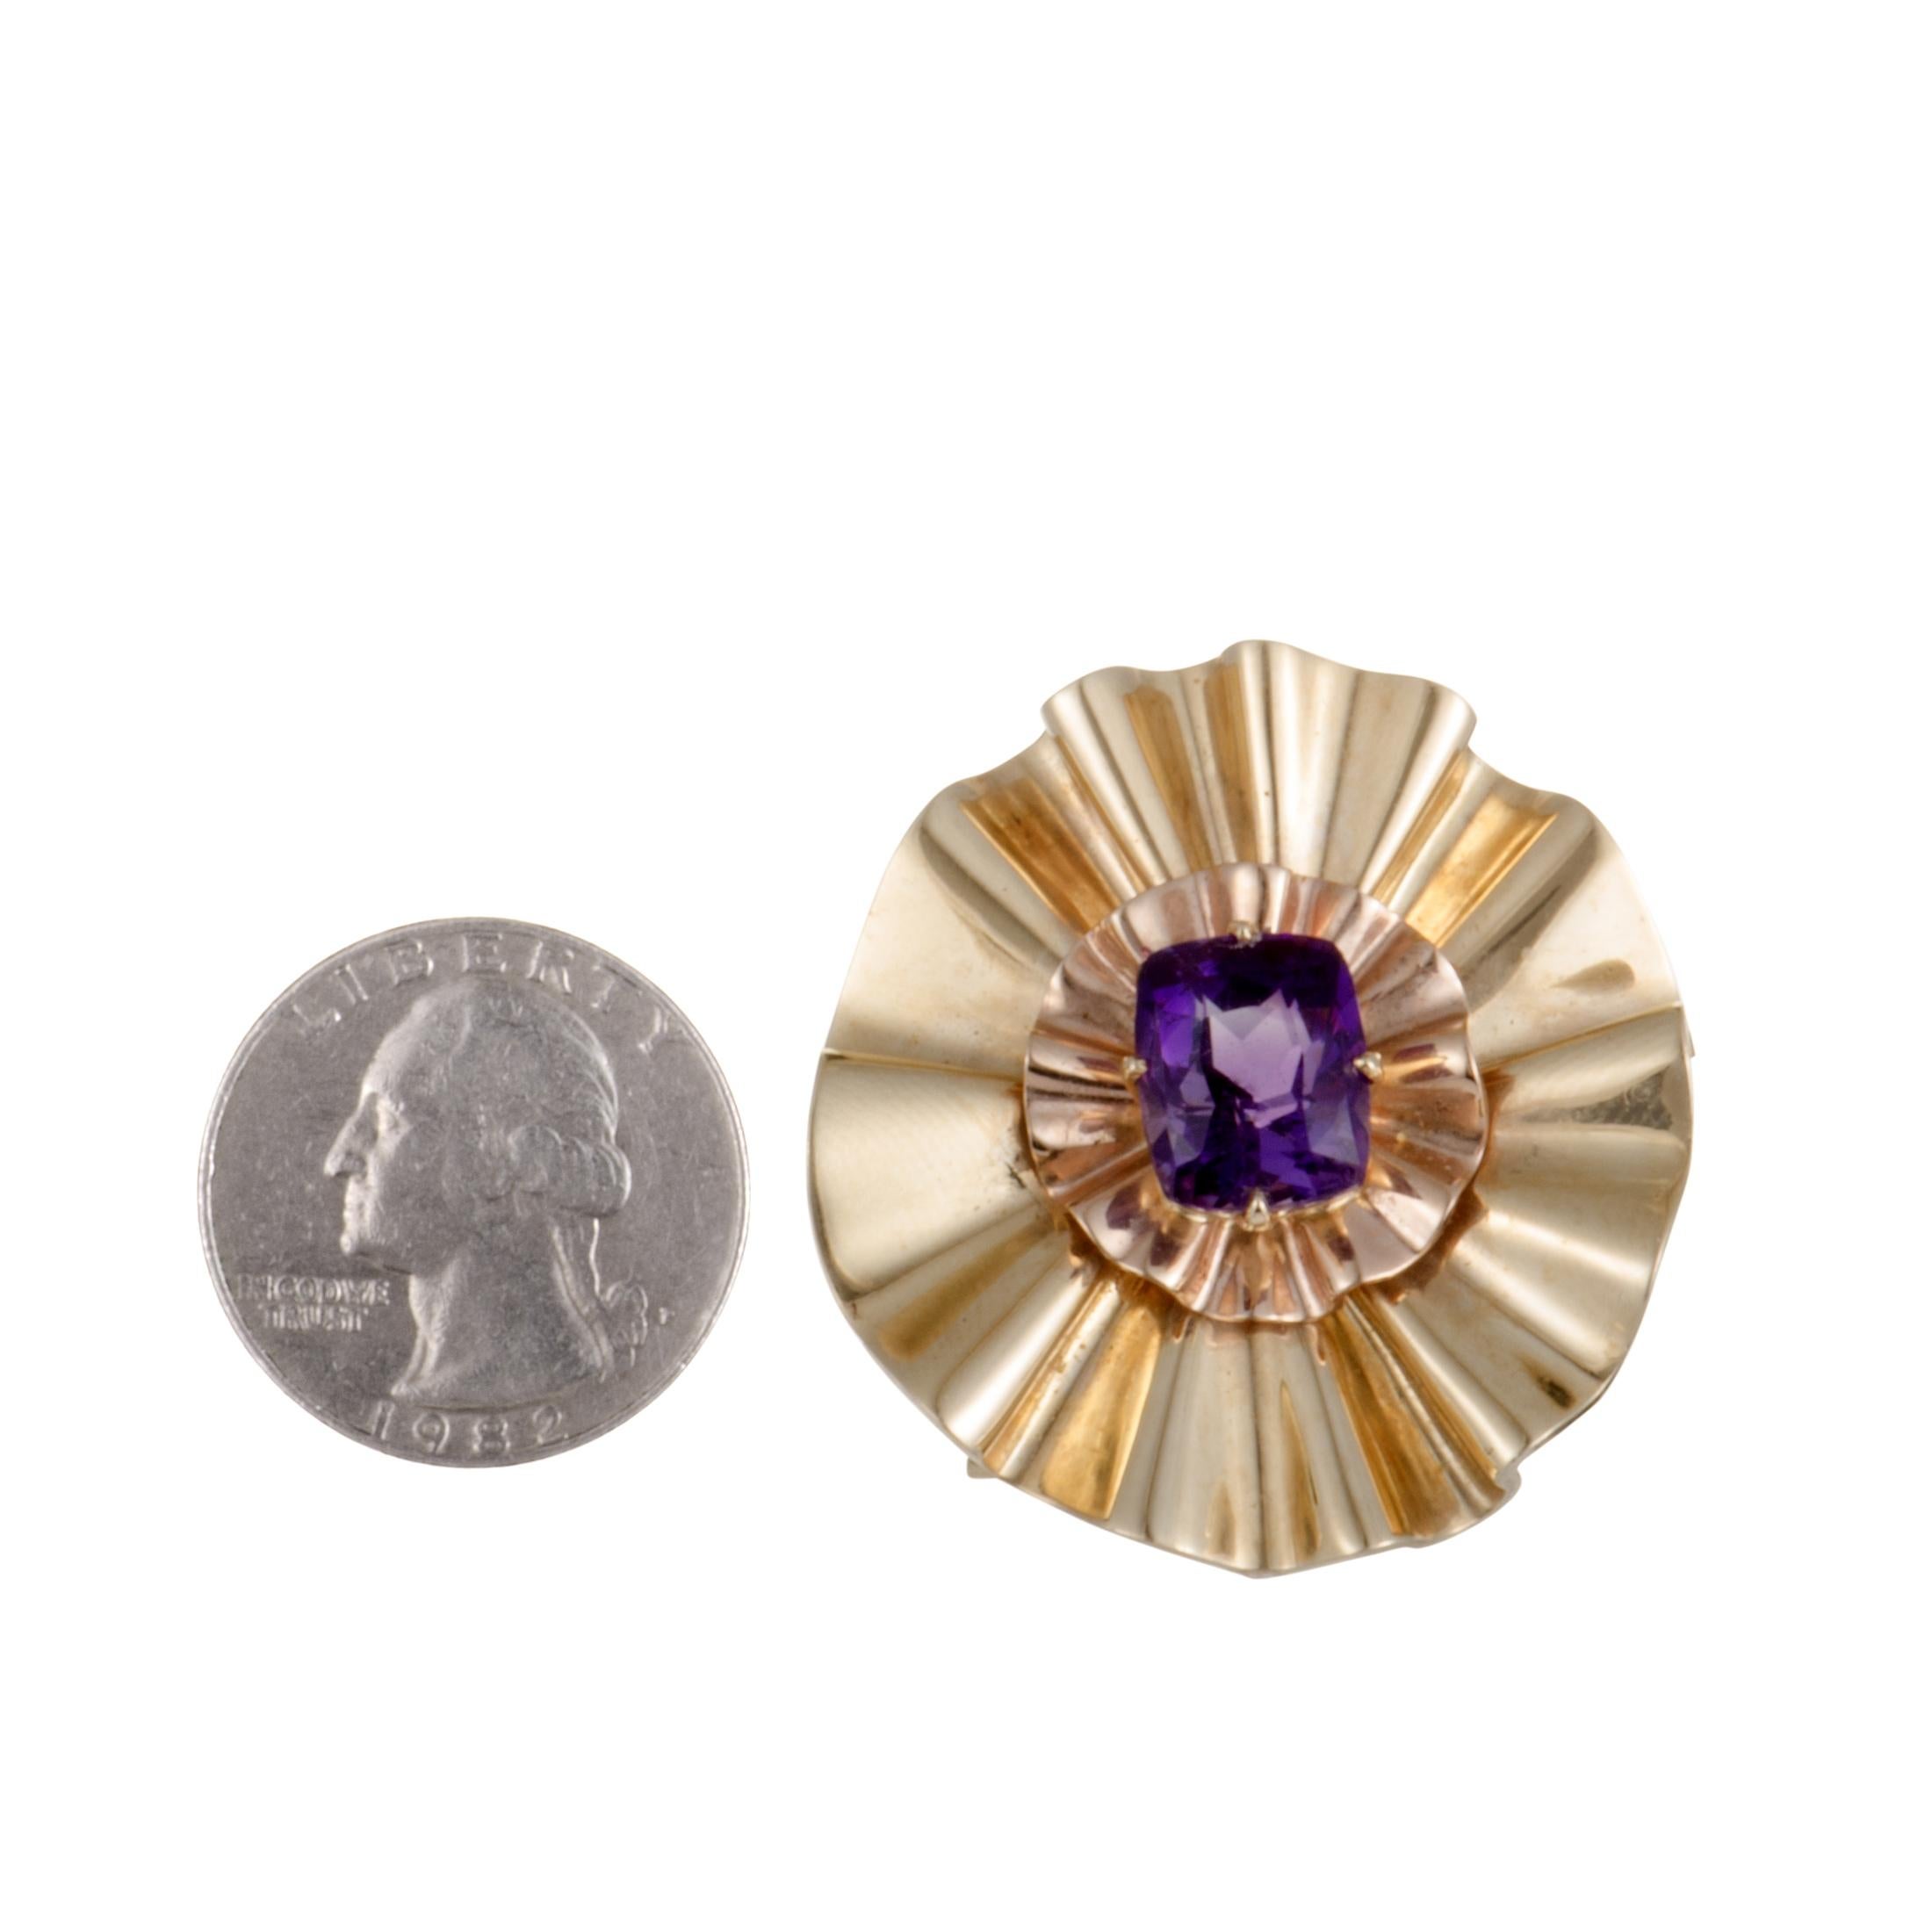 This antique piece from Mauboussin is designed in a wonderfully elegant manner and expertly crafted from classy 18K yellow gold. The brooch is attractively decorated with a single amethyst that splendidly accentuates the radiant sheen of the gold.